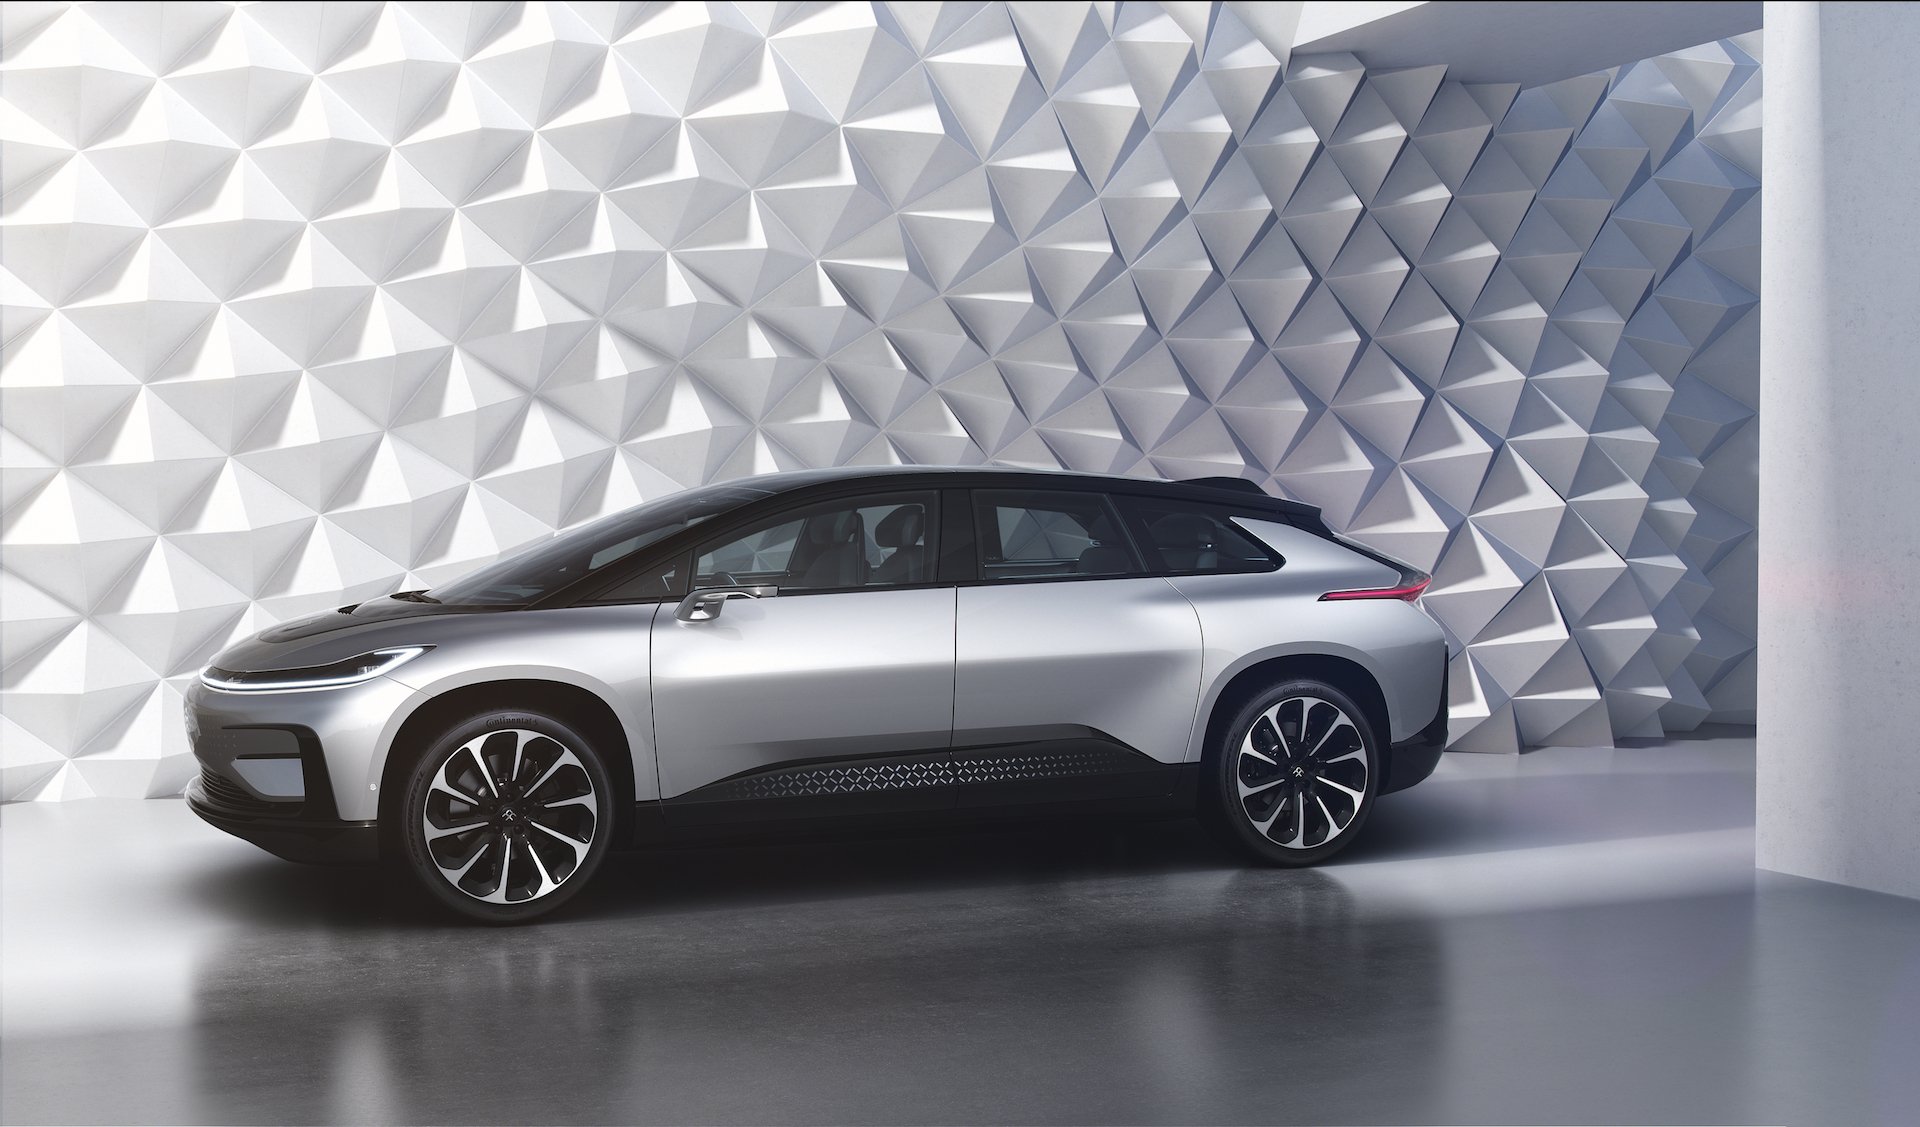 Faraday Future partners with Phillips to develop and showcase health and wellness features